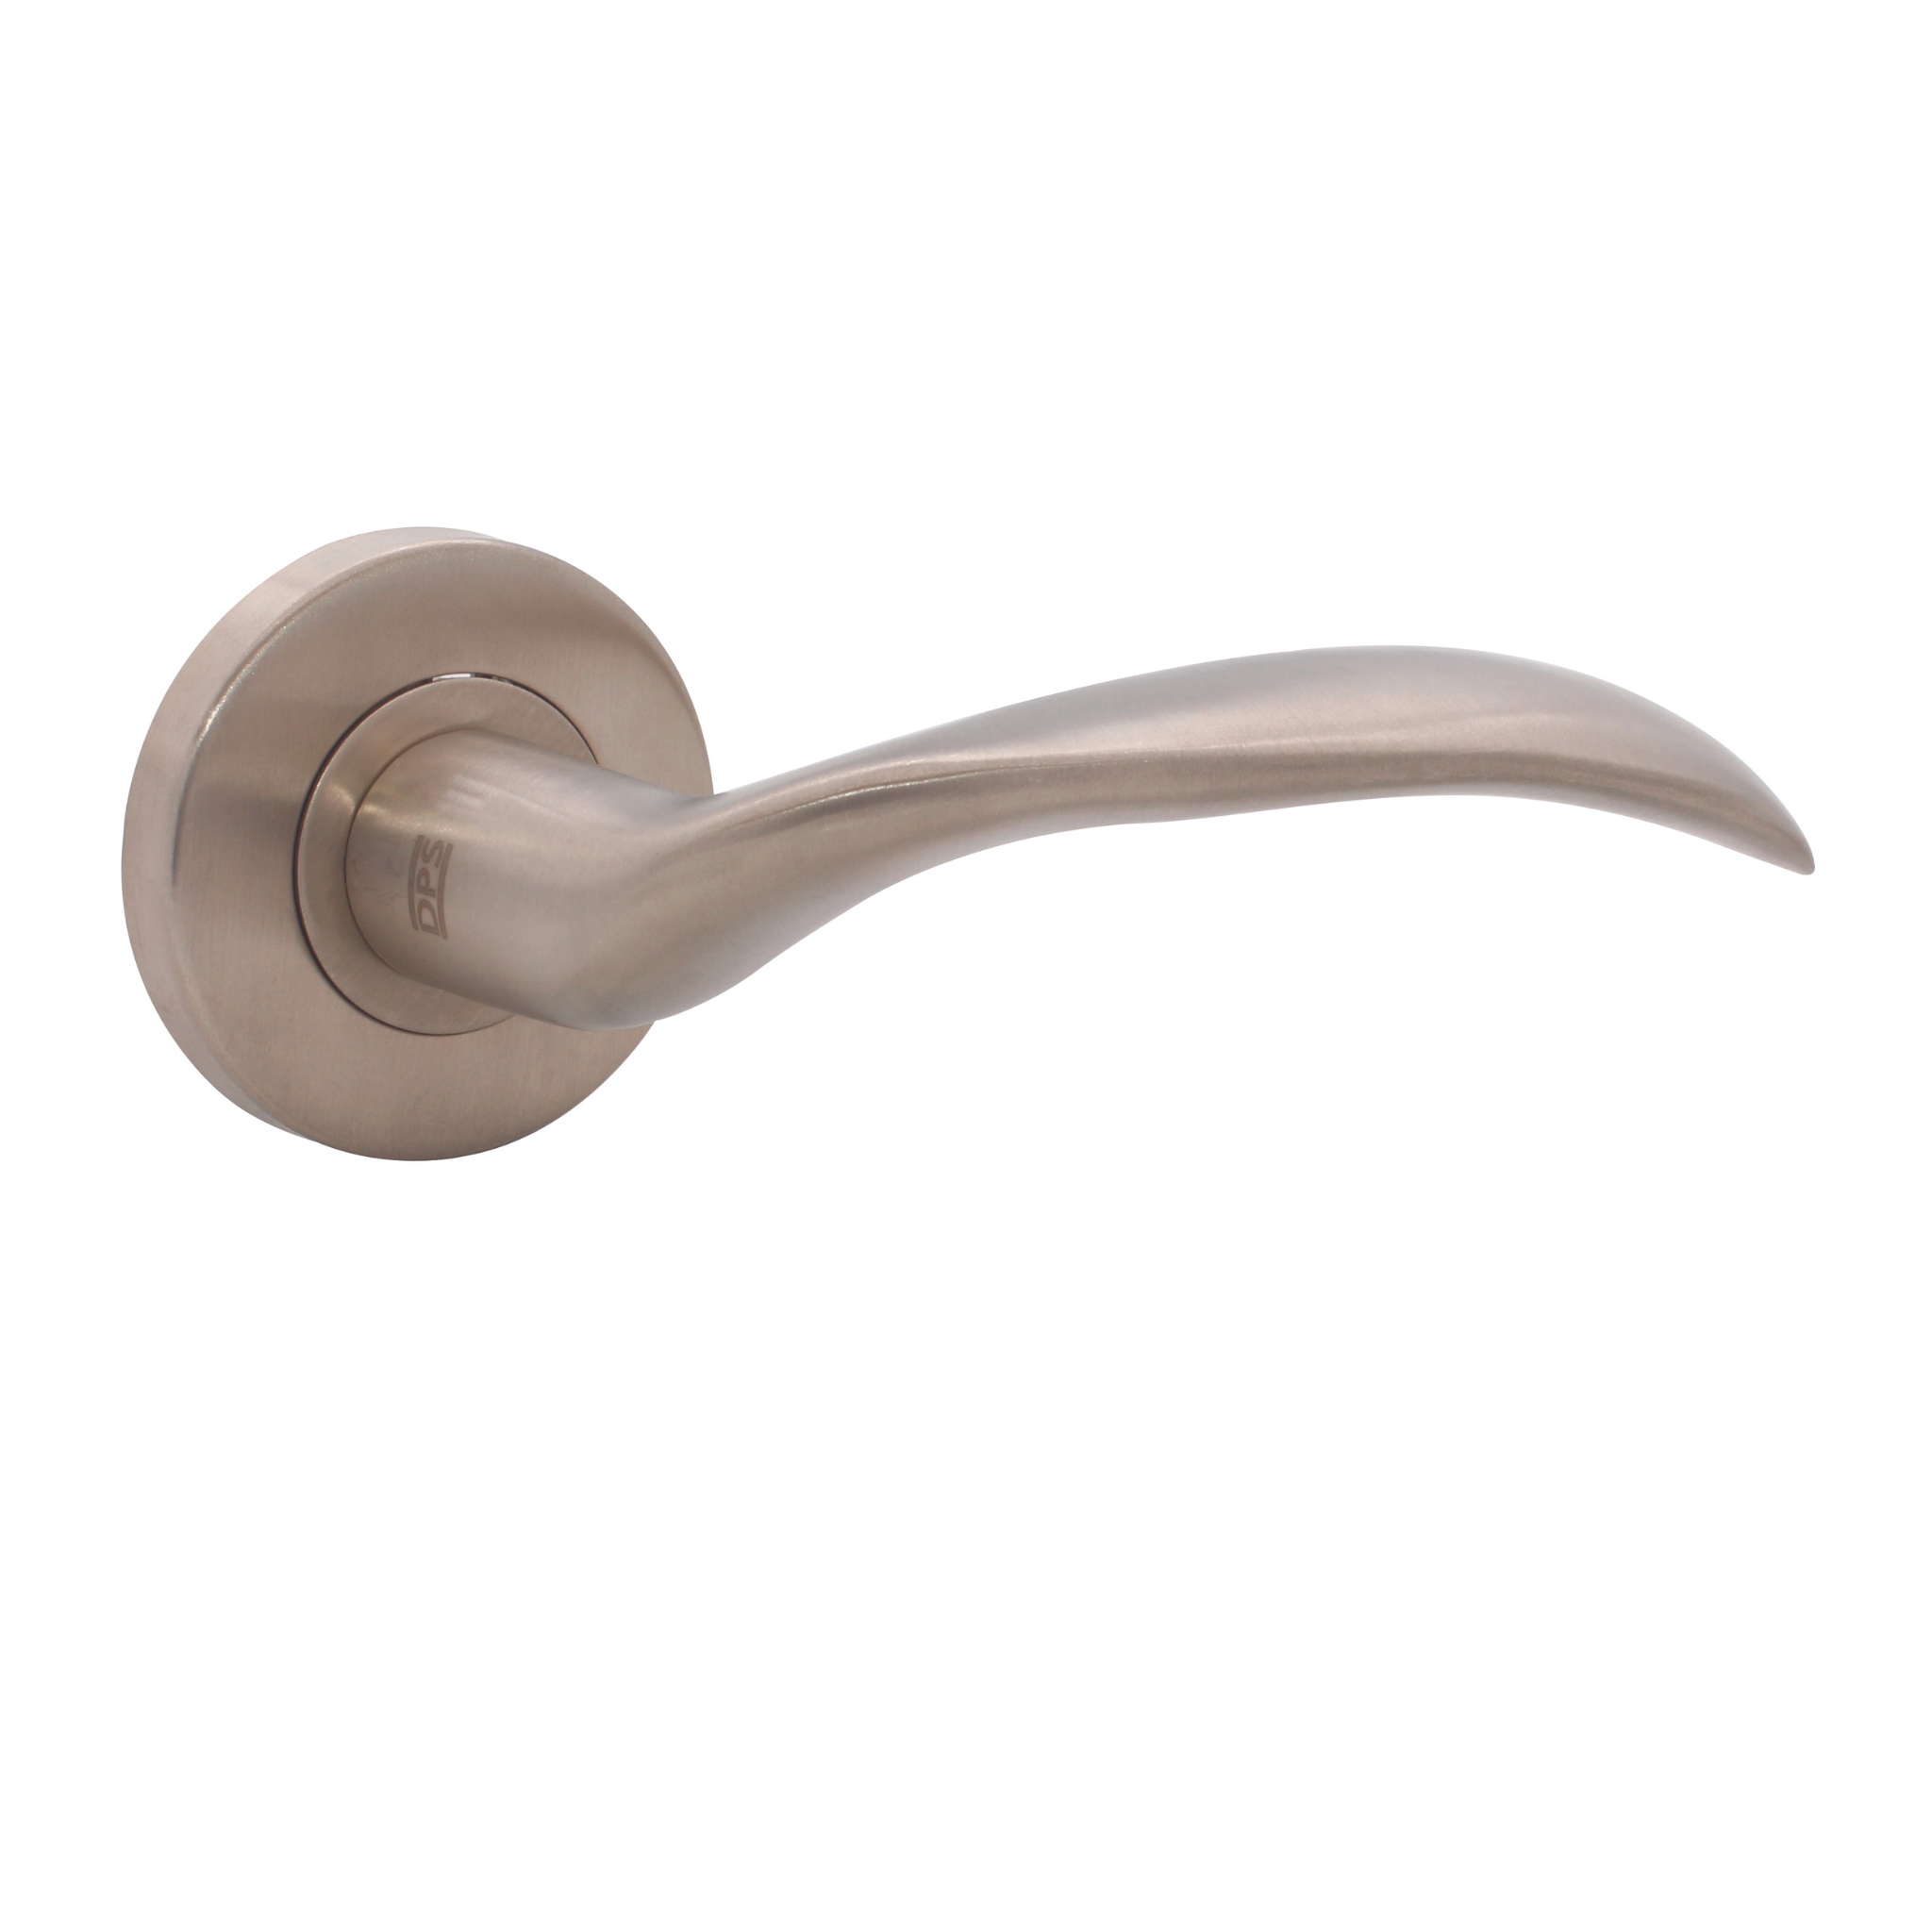 FS101.R._.TR, Lever Handles, Solid, On Round Rose, With Escutcheons, 117mm (l), Stainless Steel with Tarnish Resistant, CISA